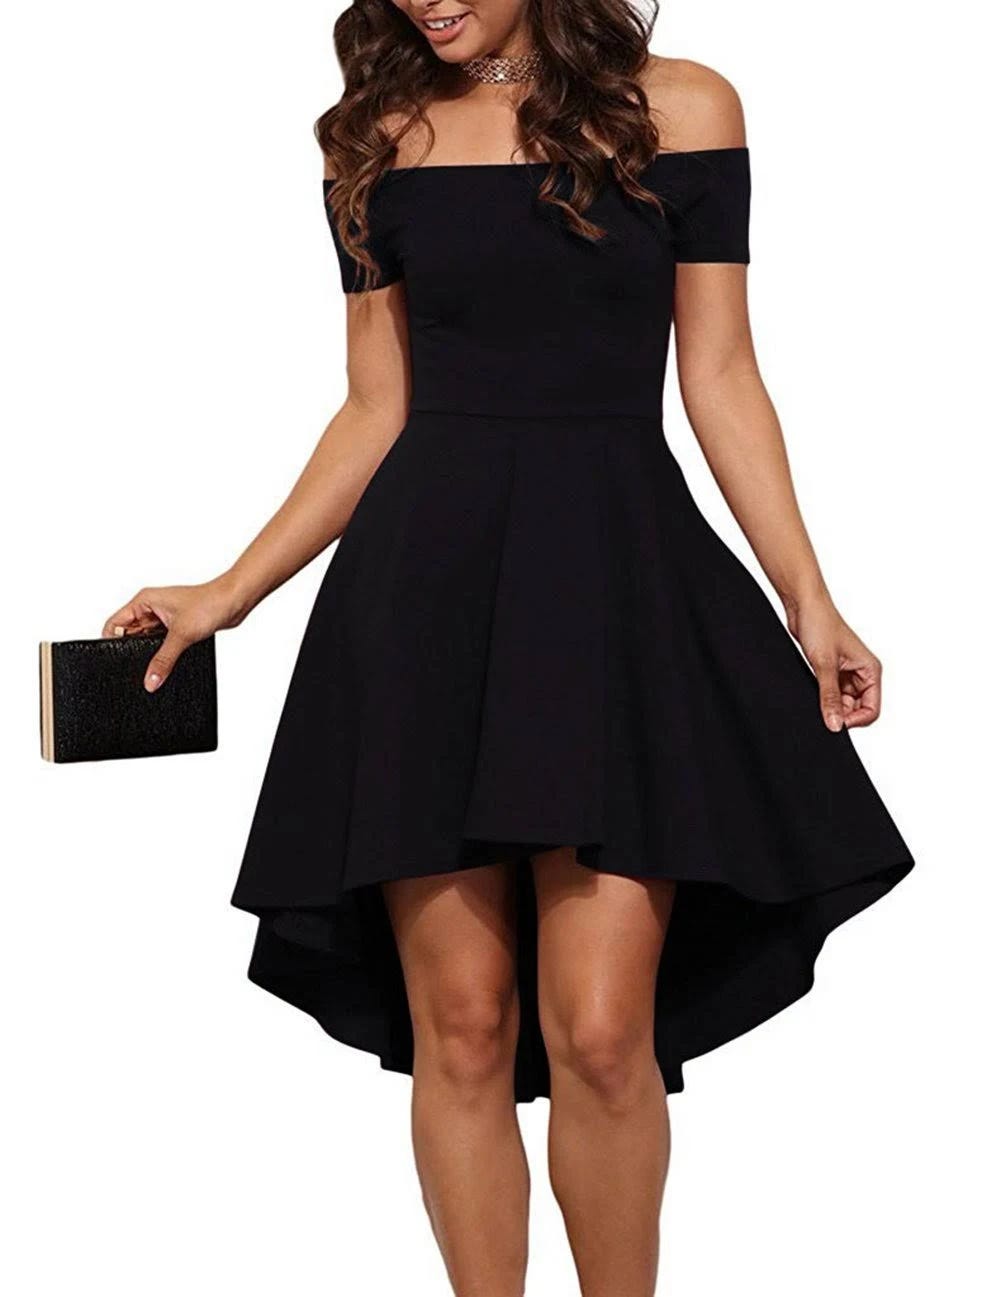 Off the Shoulder High Low Skater Dress - Luxurious Summer Party Look | Image